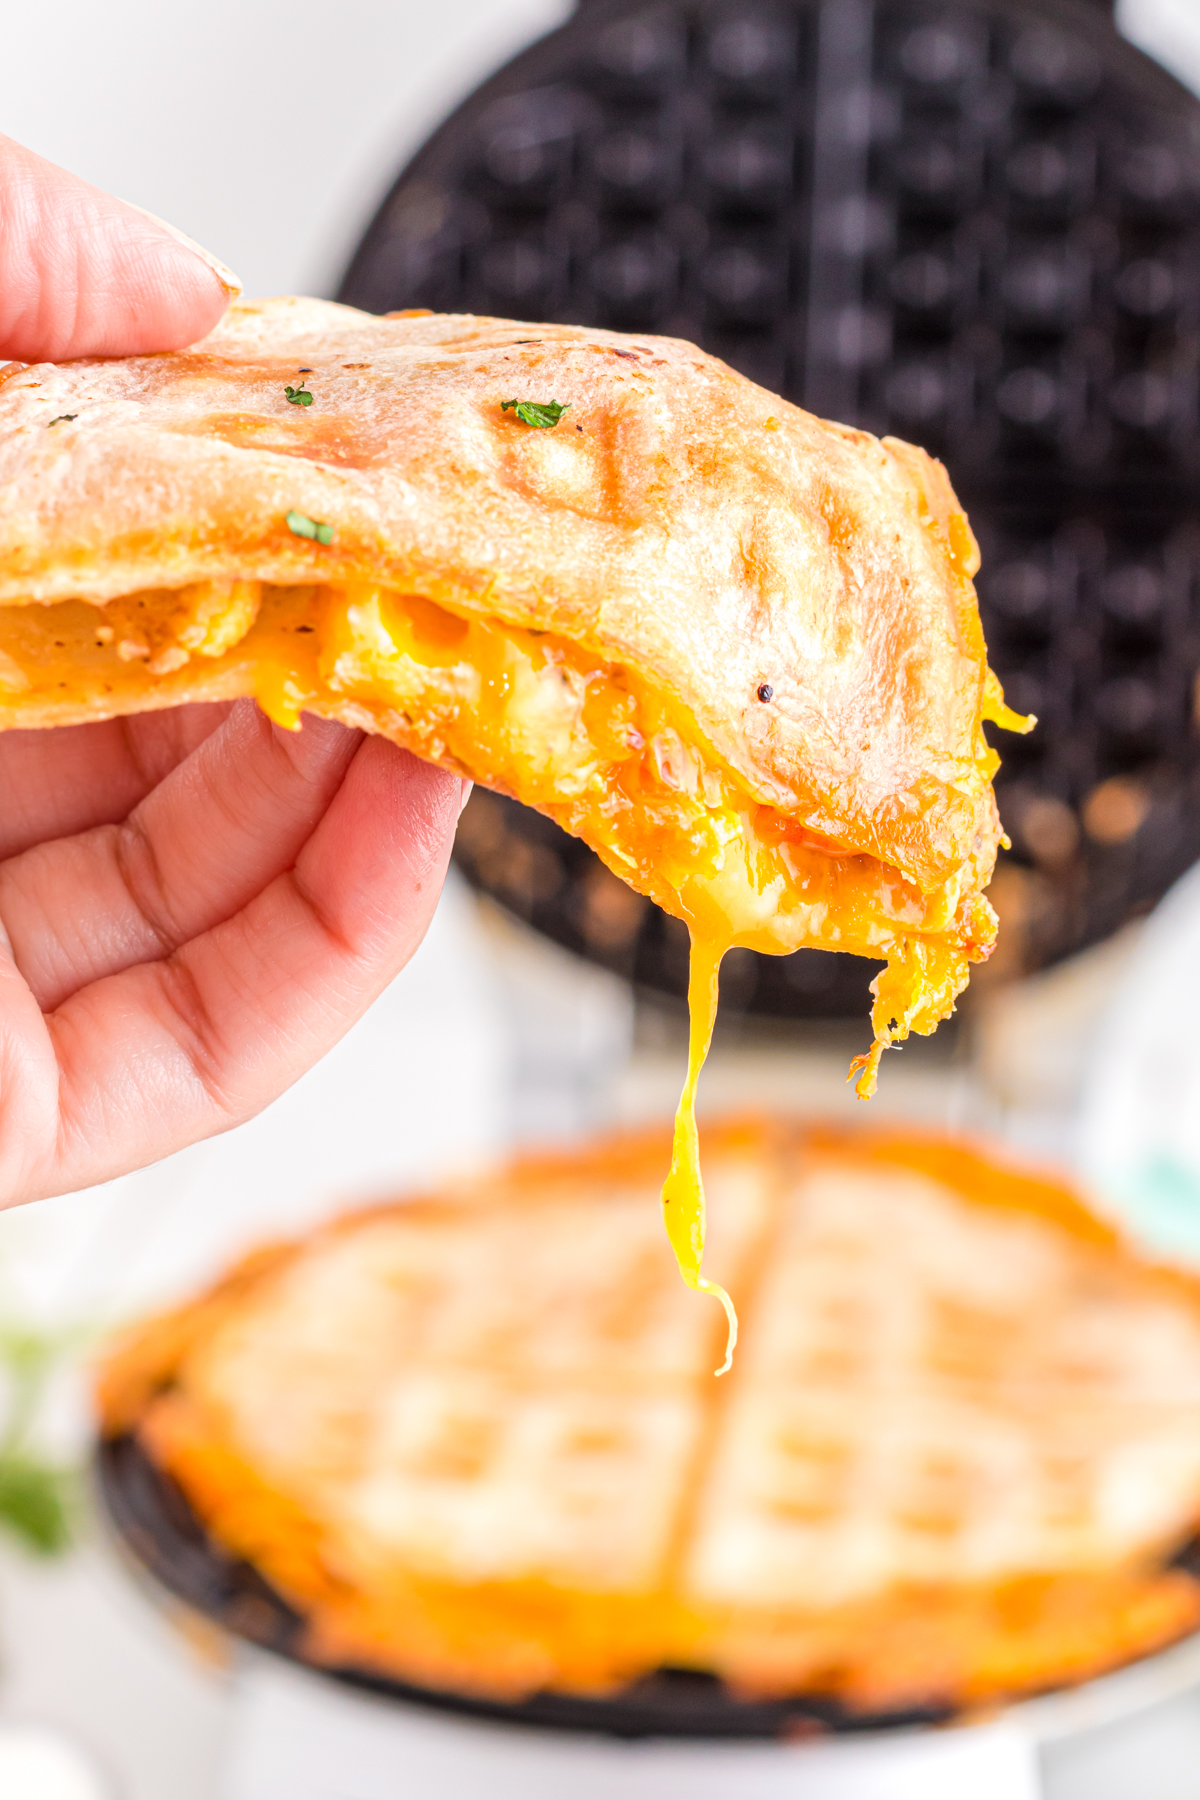 Quesadilla slice in hand with melted cheese dripping out.